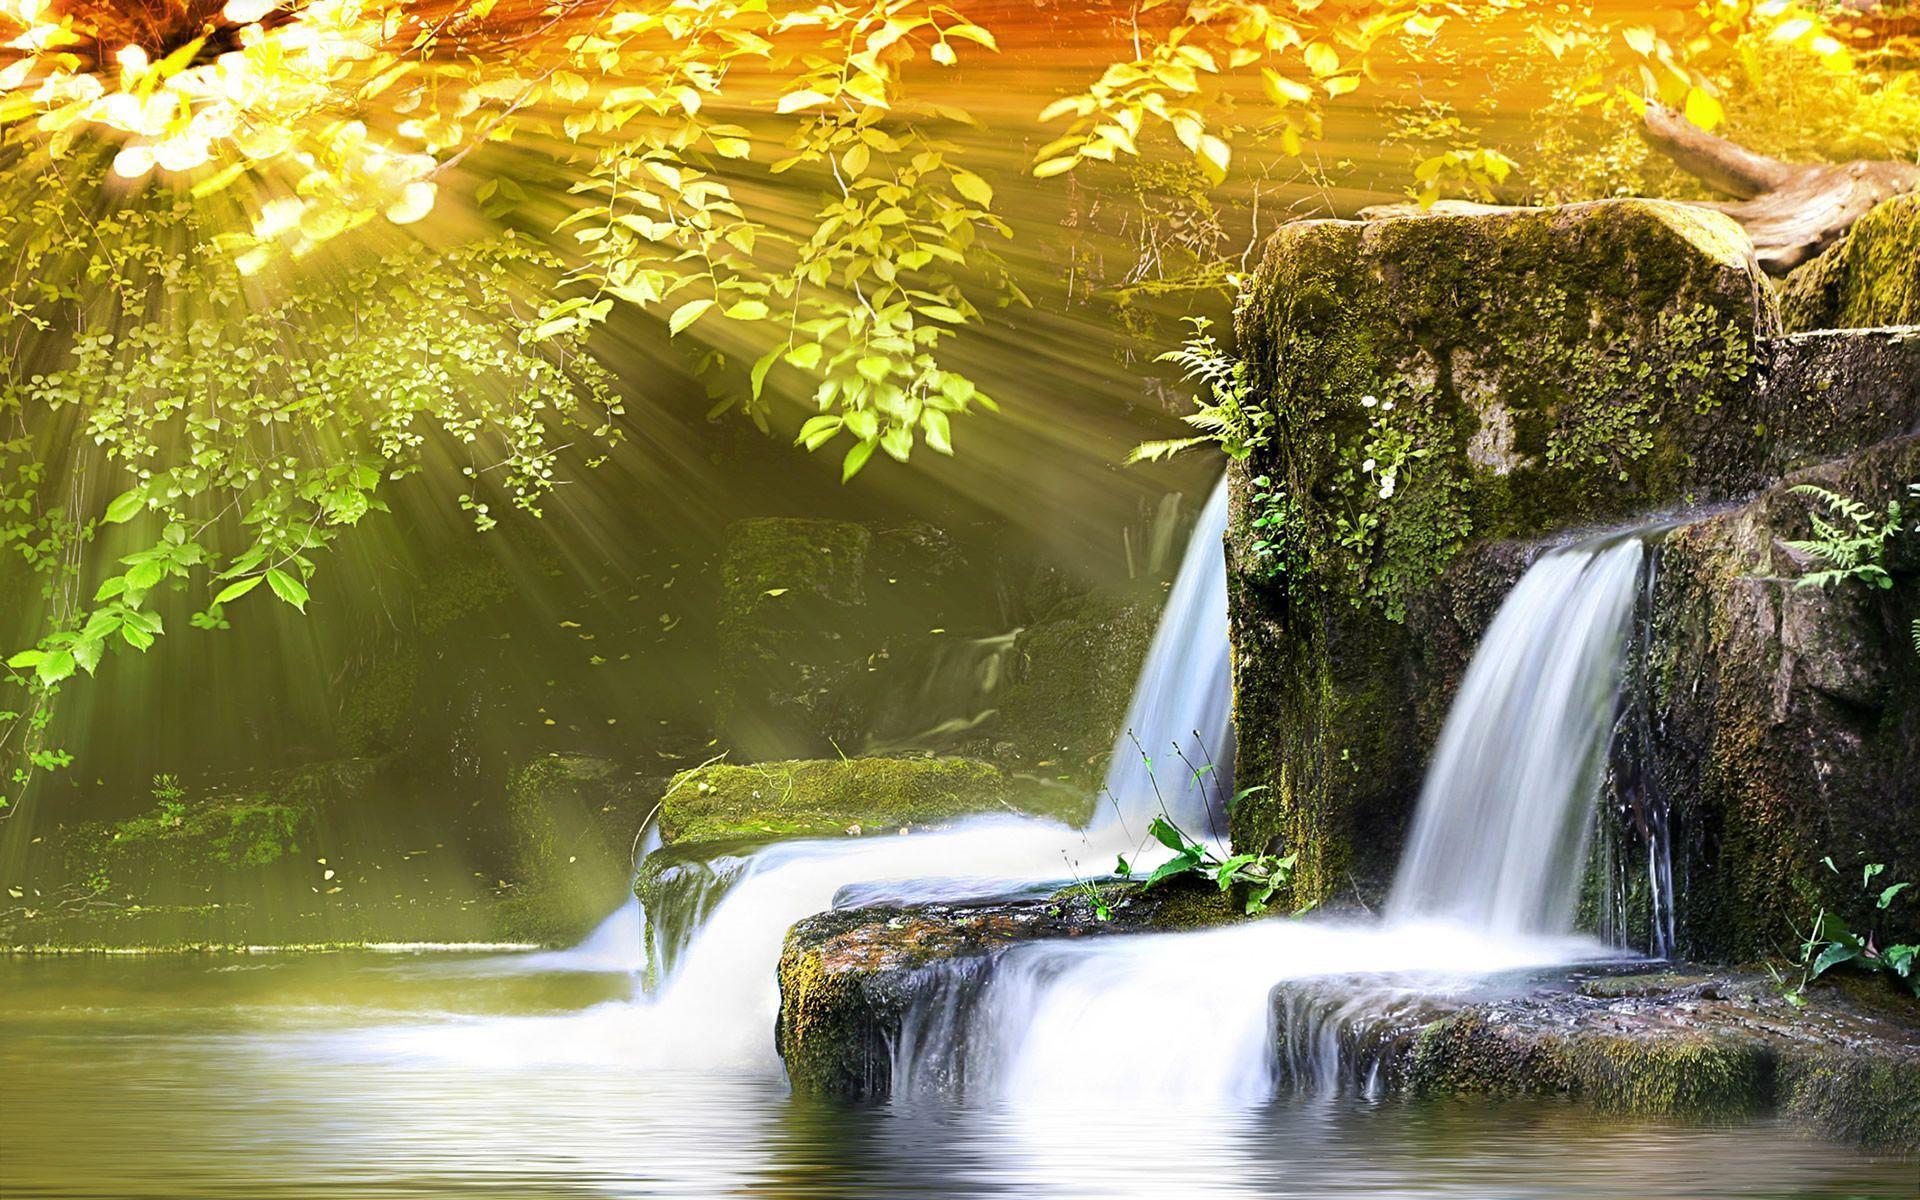 Nature Backgrounds Image - Wallpaper Cave